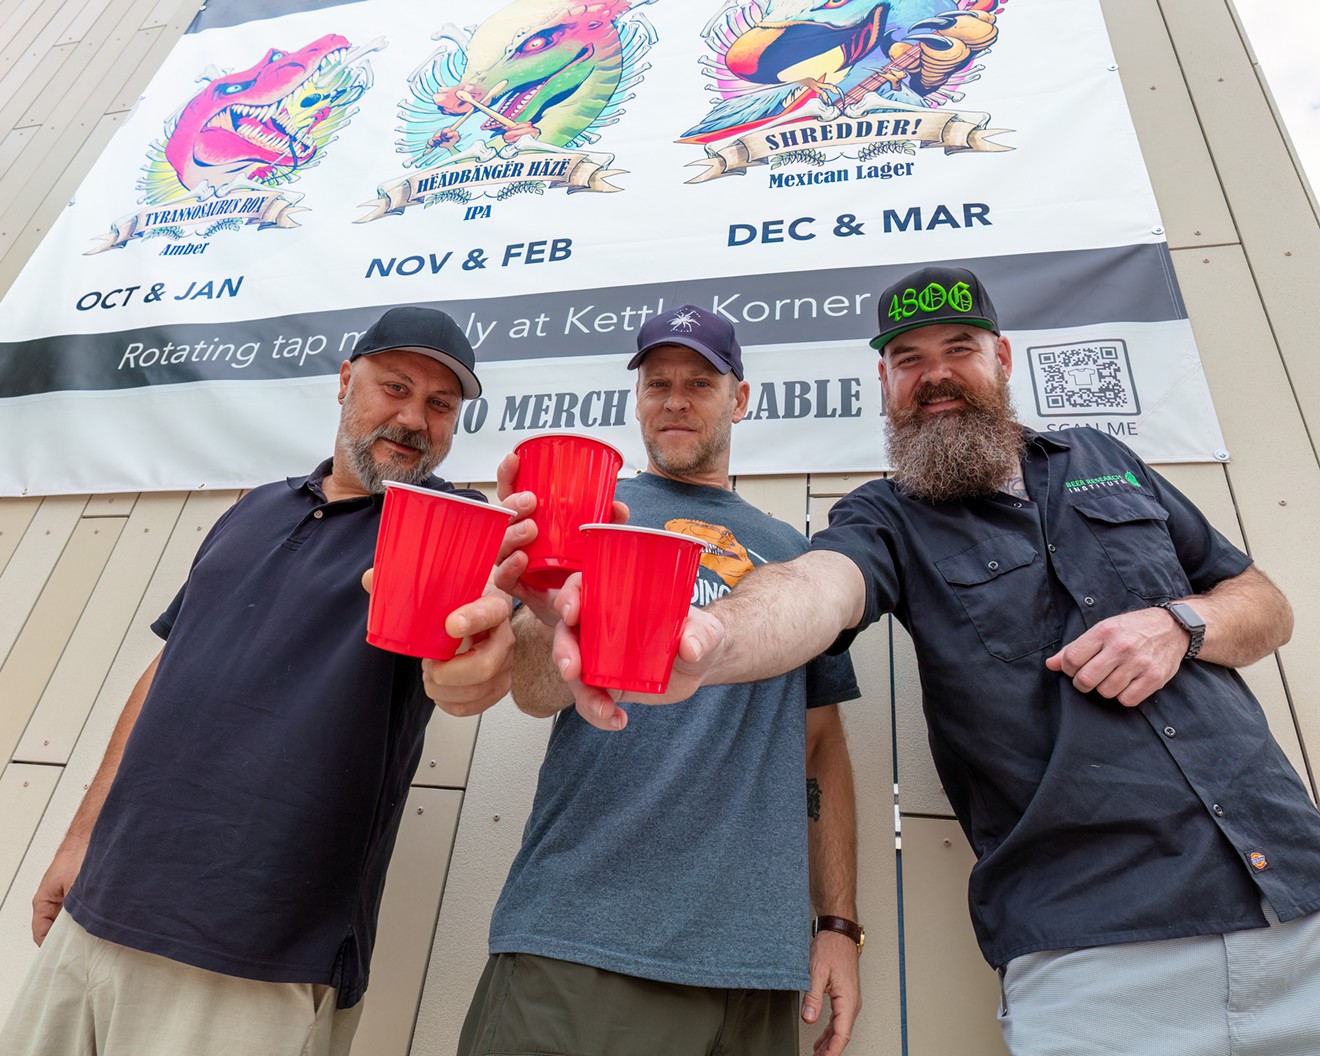 Jay Fotos (l), Matt Strangwayes, and Mark Larue (r) are ready to celebrate! The Dinosaur Band is back together at the Phoenix Zoo and they are bring the beer.